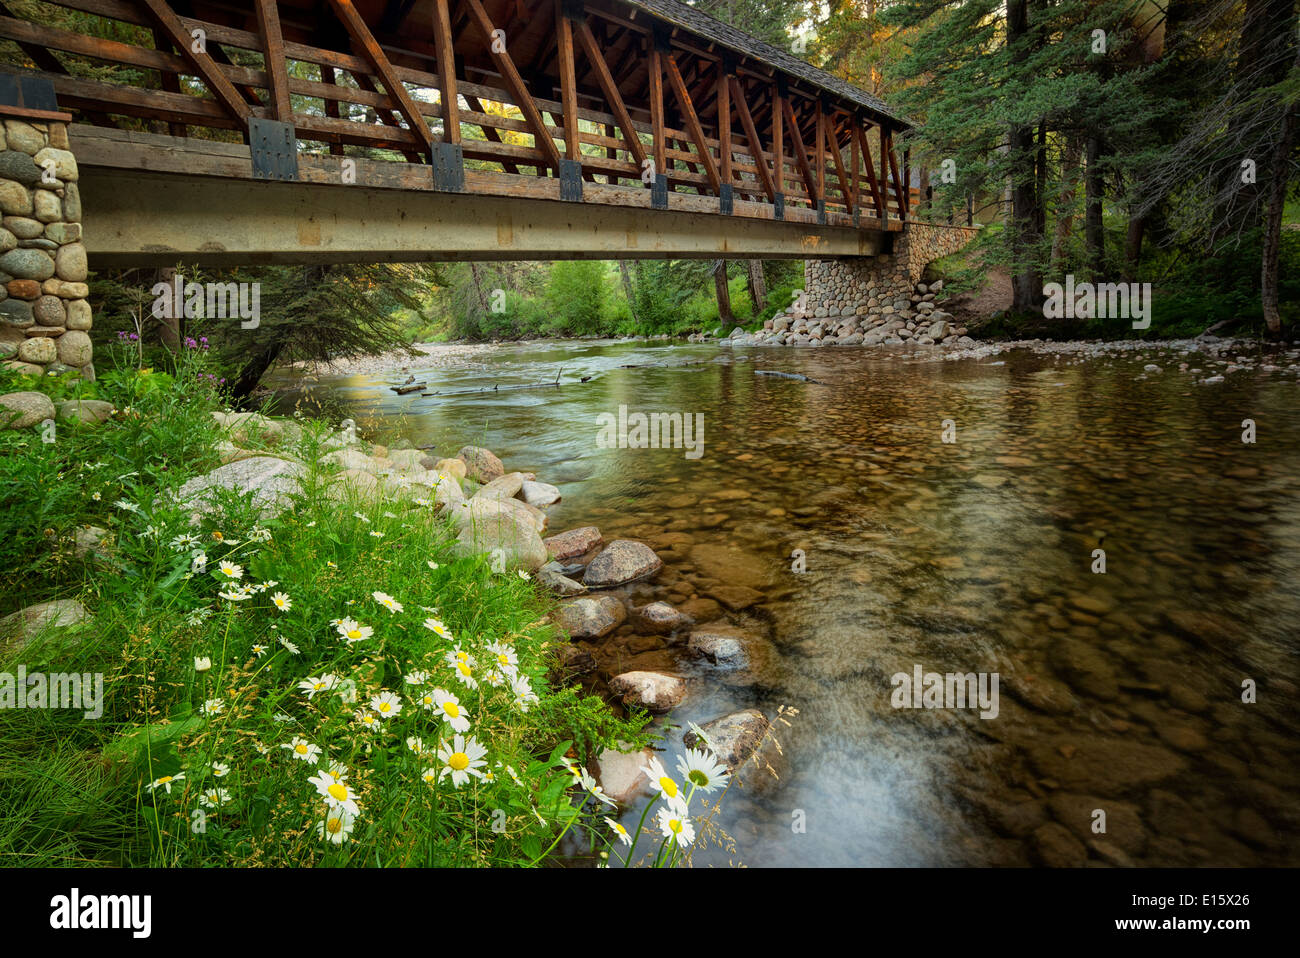 Covered footbridge and daisy flowers with Gore Creek. Gerald ford Park. Vail, Colorado Stock Photo